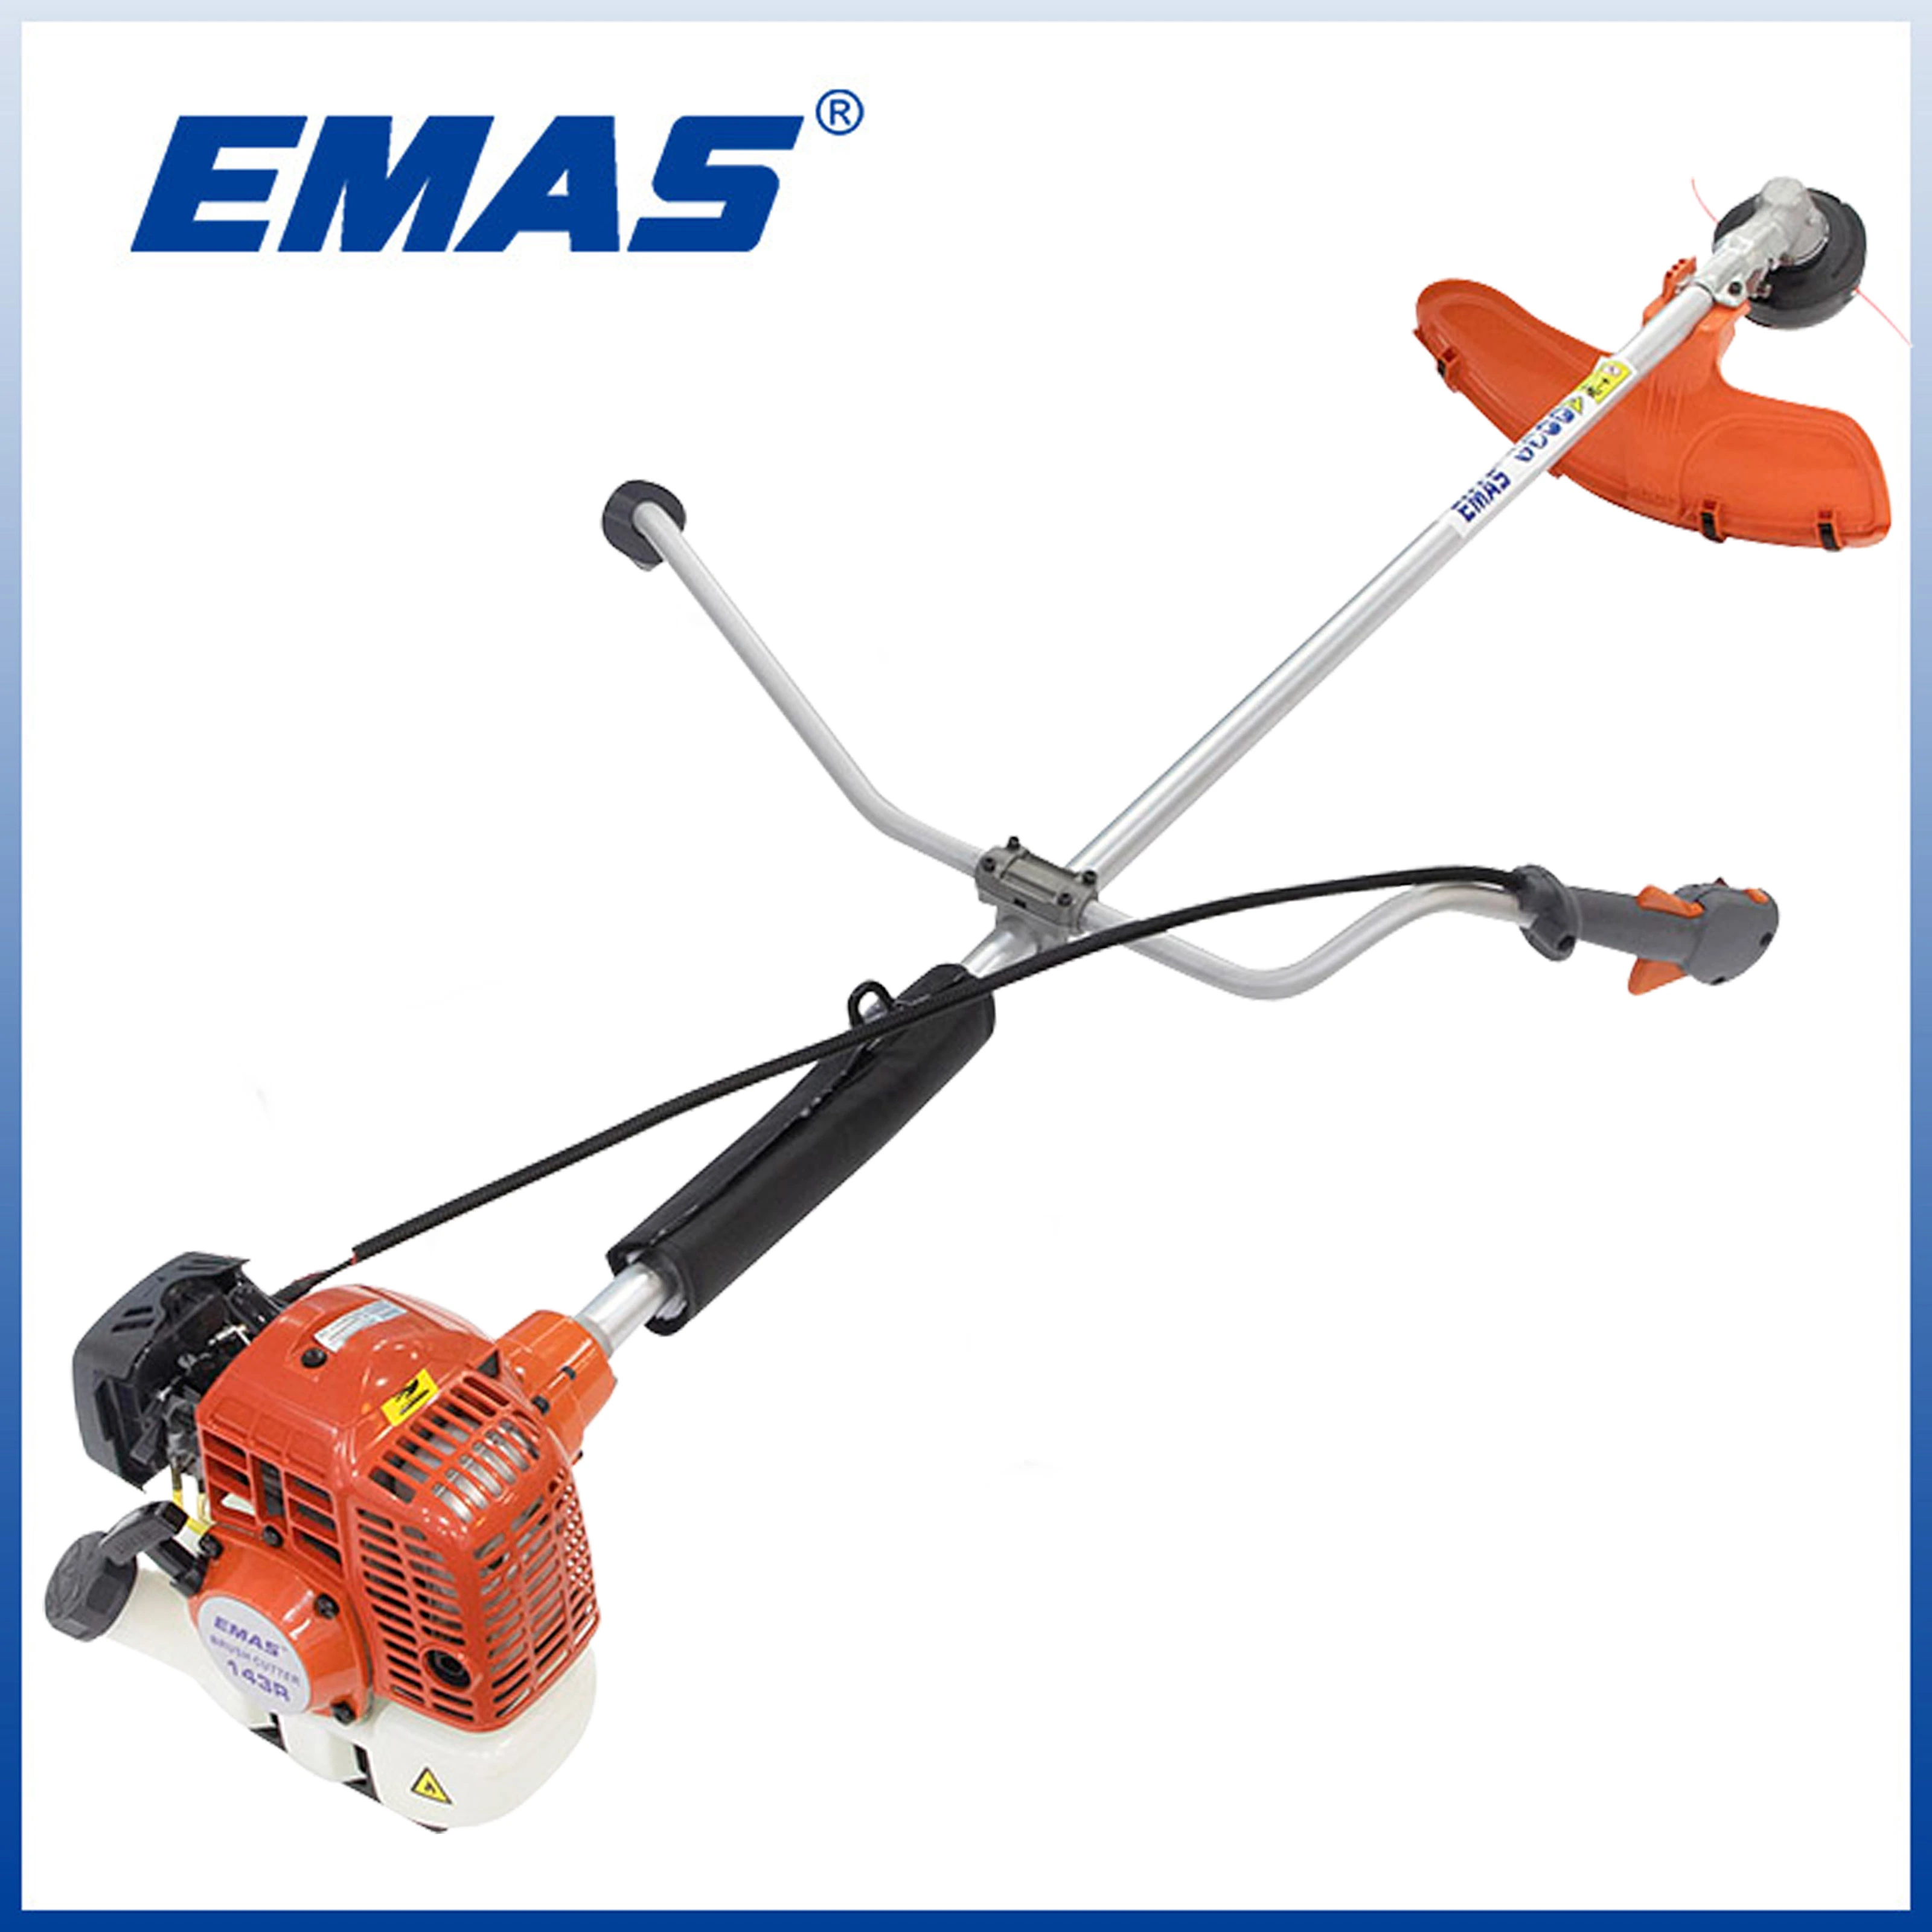 Emas New Model Professional Grass Trimmer Eh143r Brush Cutter in 43cc